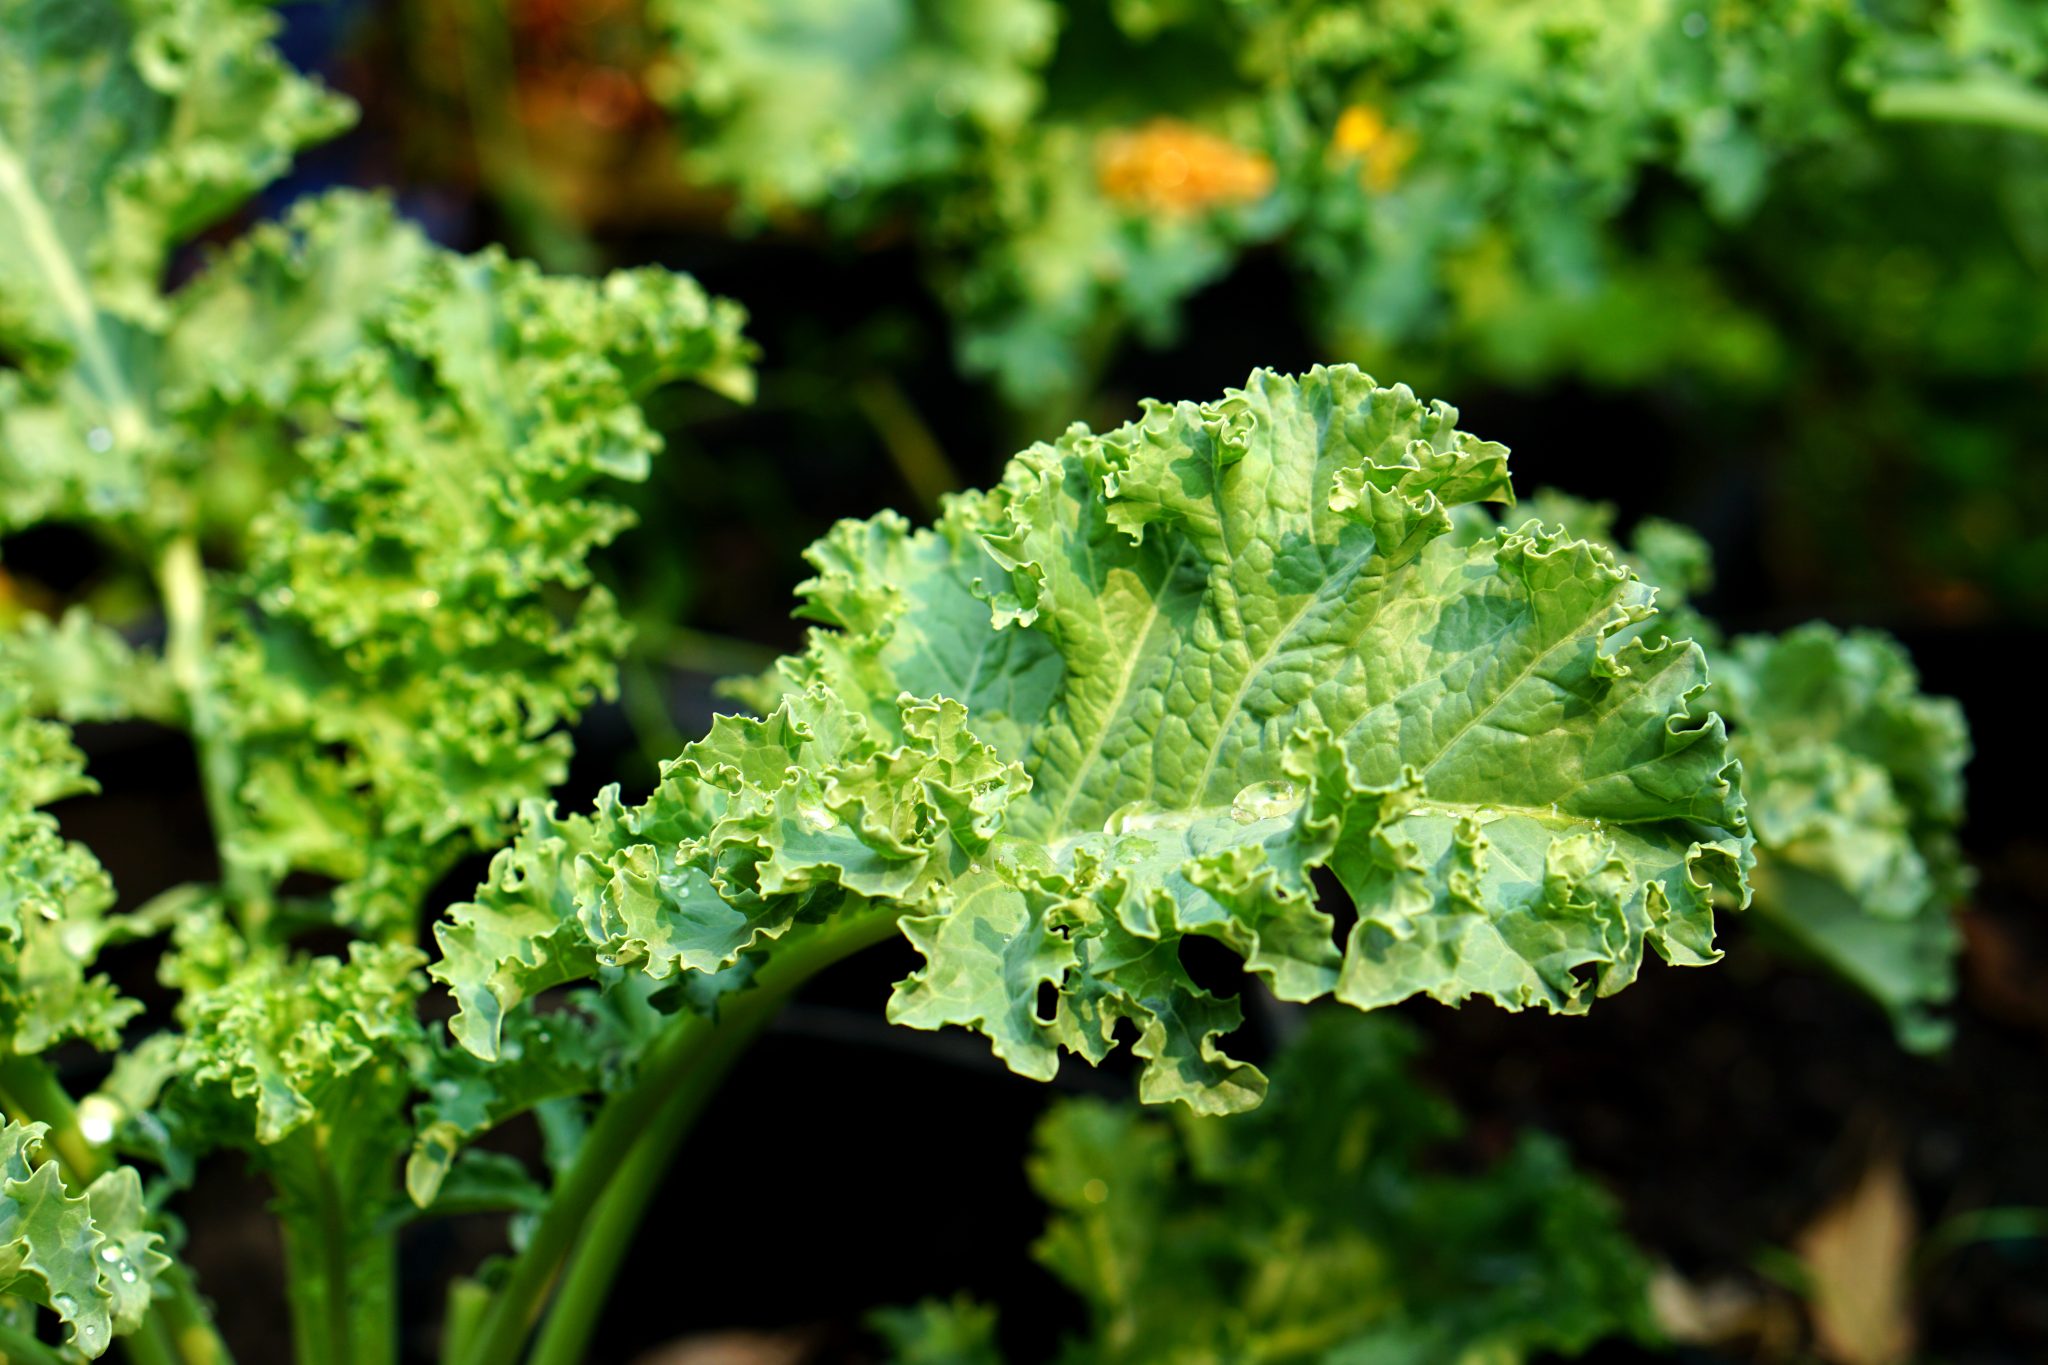 detail of kale frond